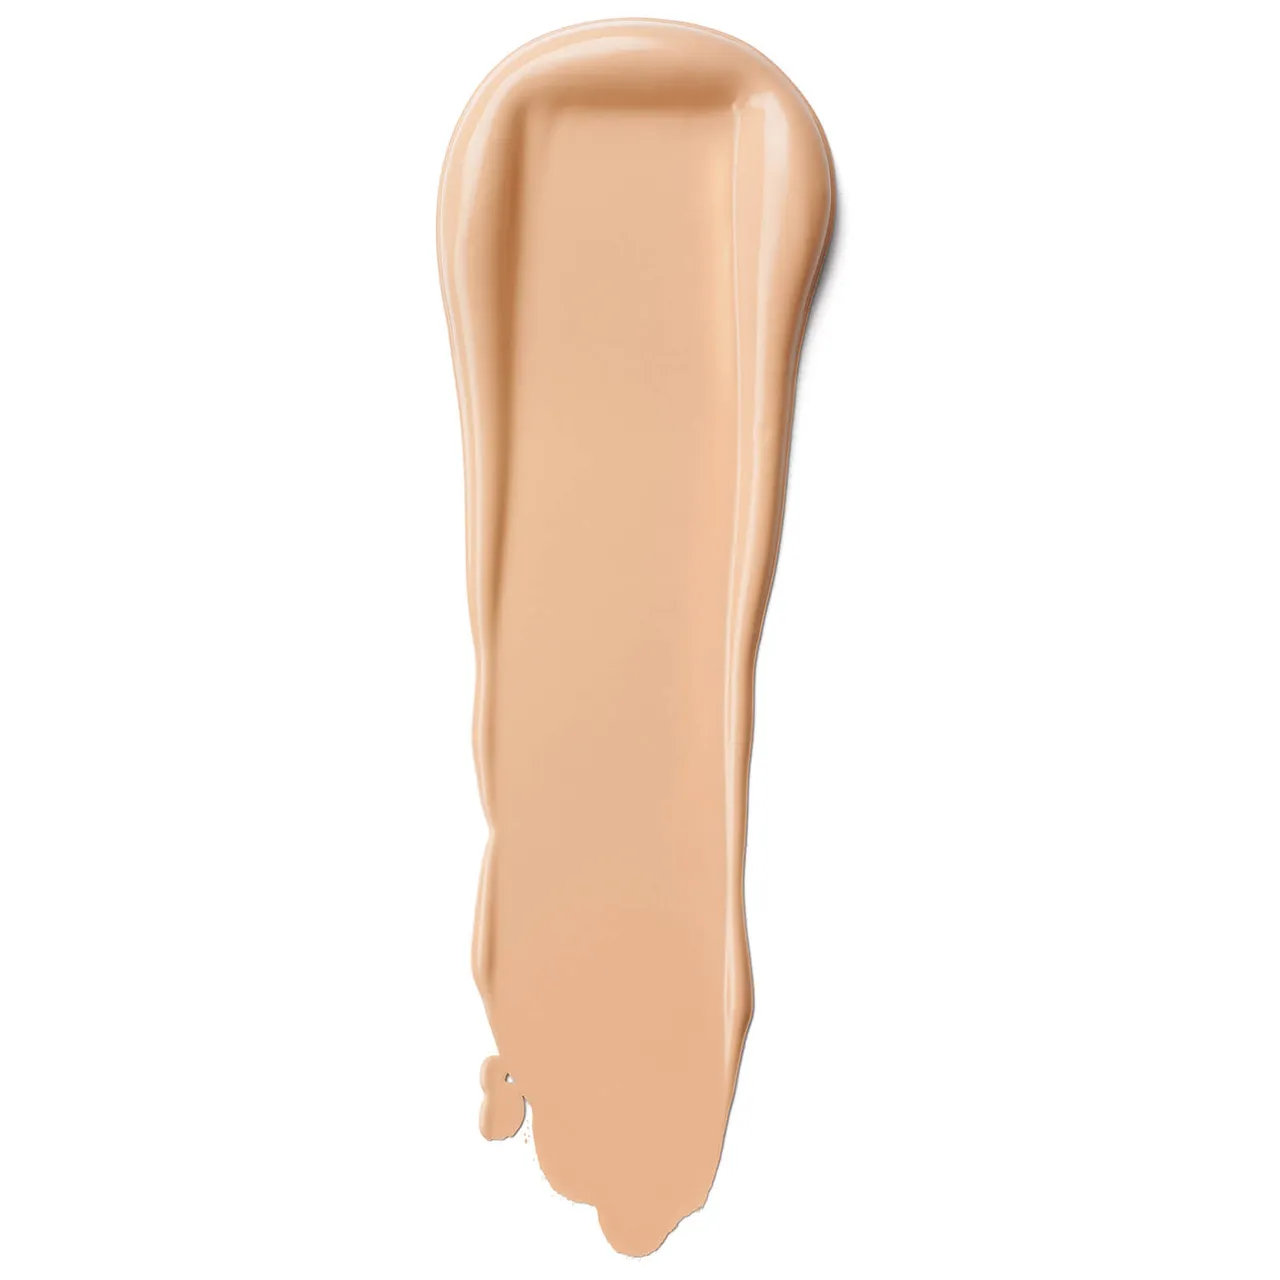 Clinique Beyond Perfecting Foundation and Concealer 30ml (Various Shades) - Cream Whip